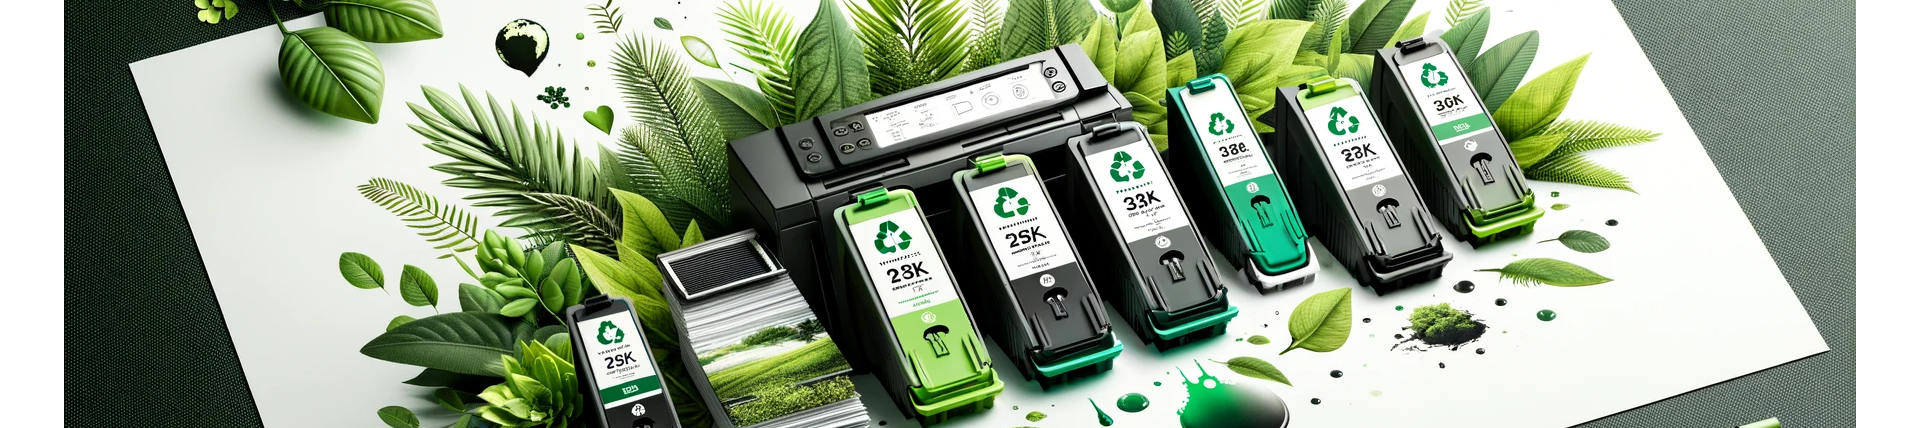 ecoink-_banner_eco-friendly_ink_company